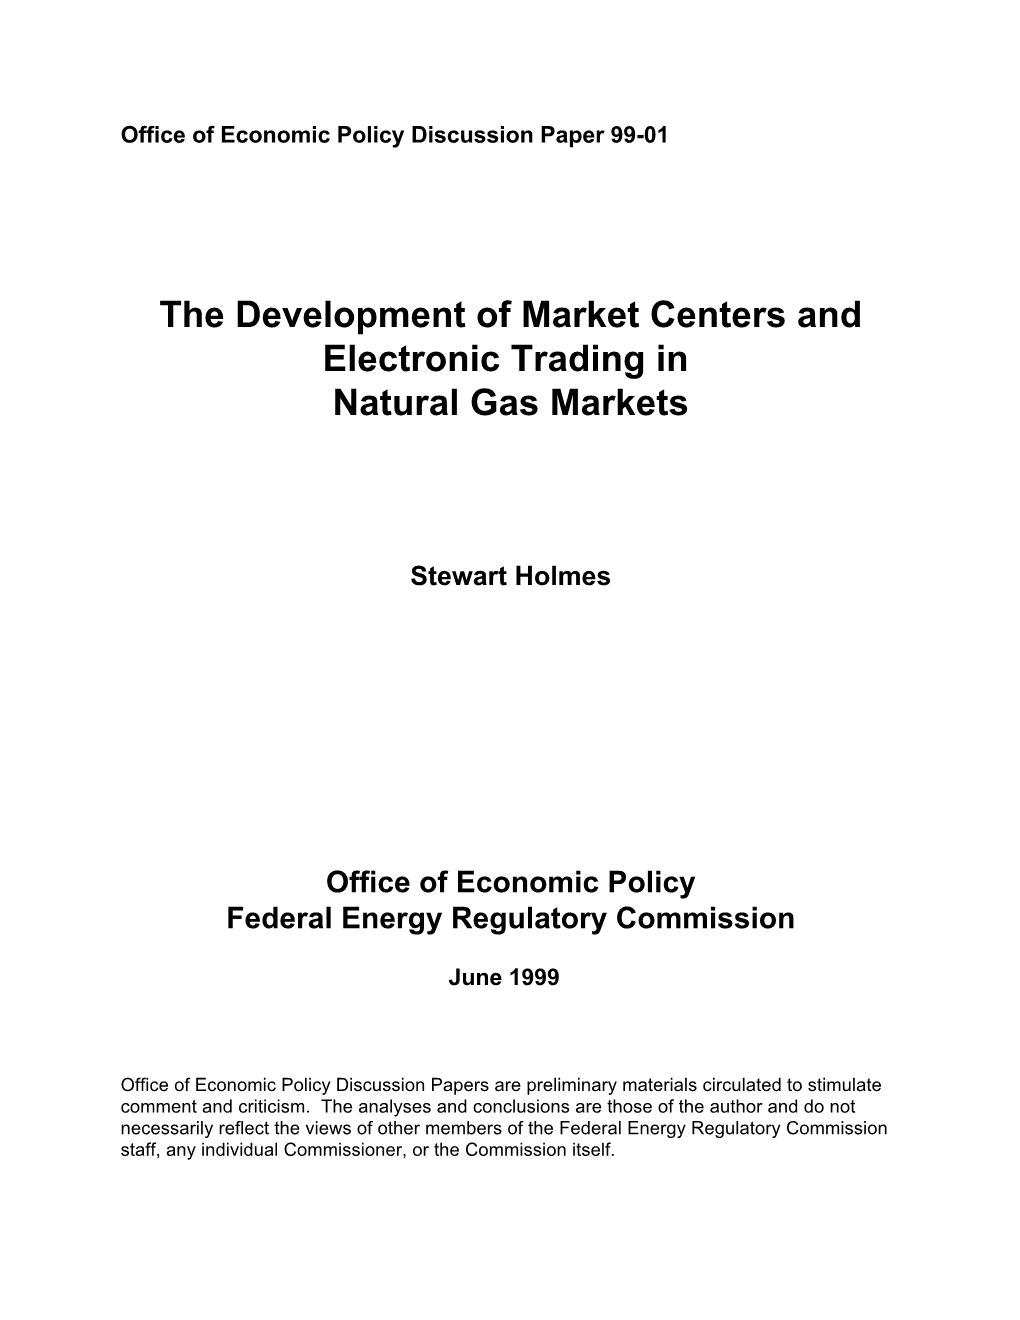 The Development of Market Centers and Electronic Trading in Natural Gas Markets